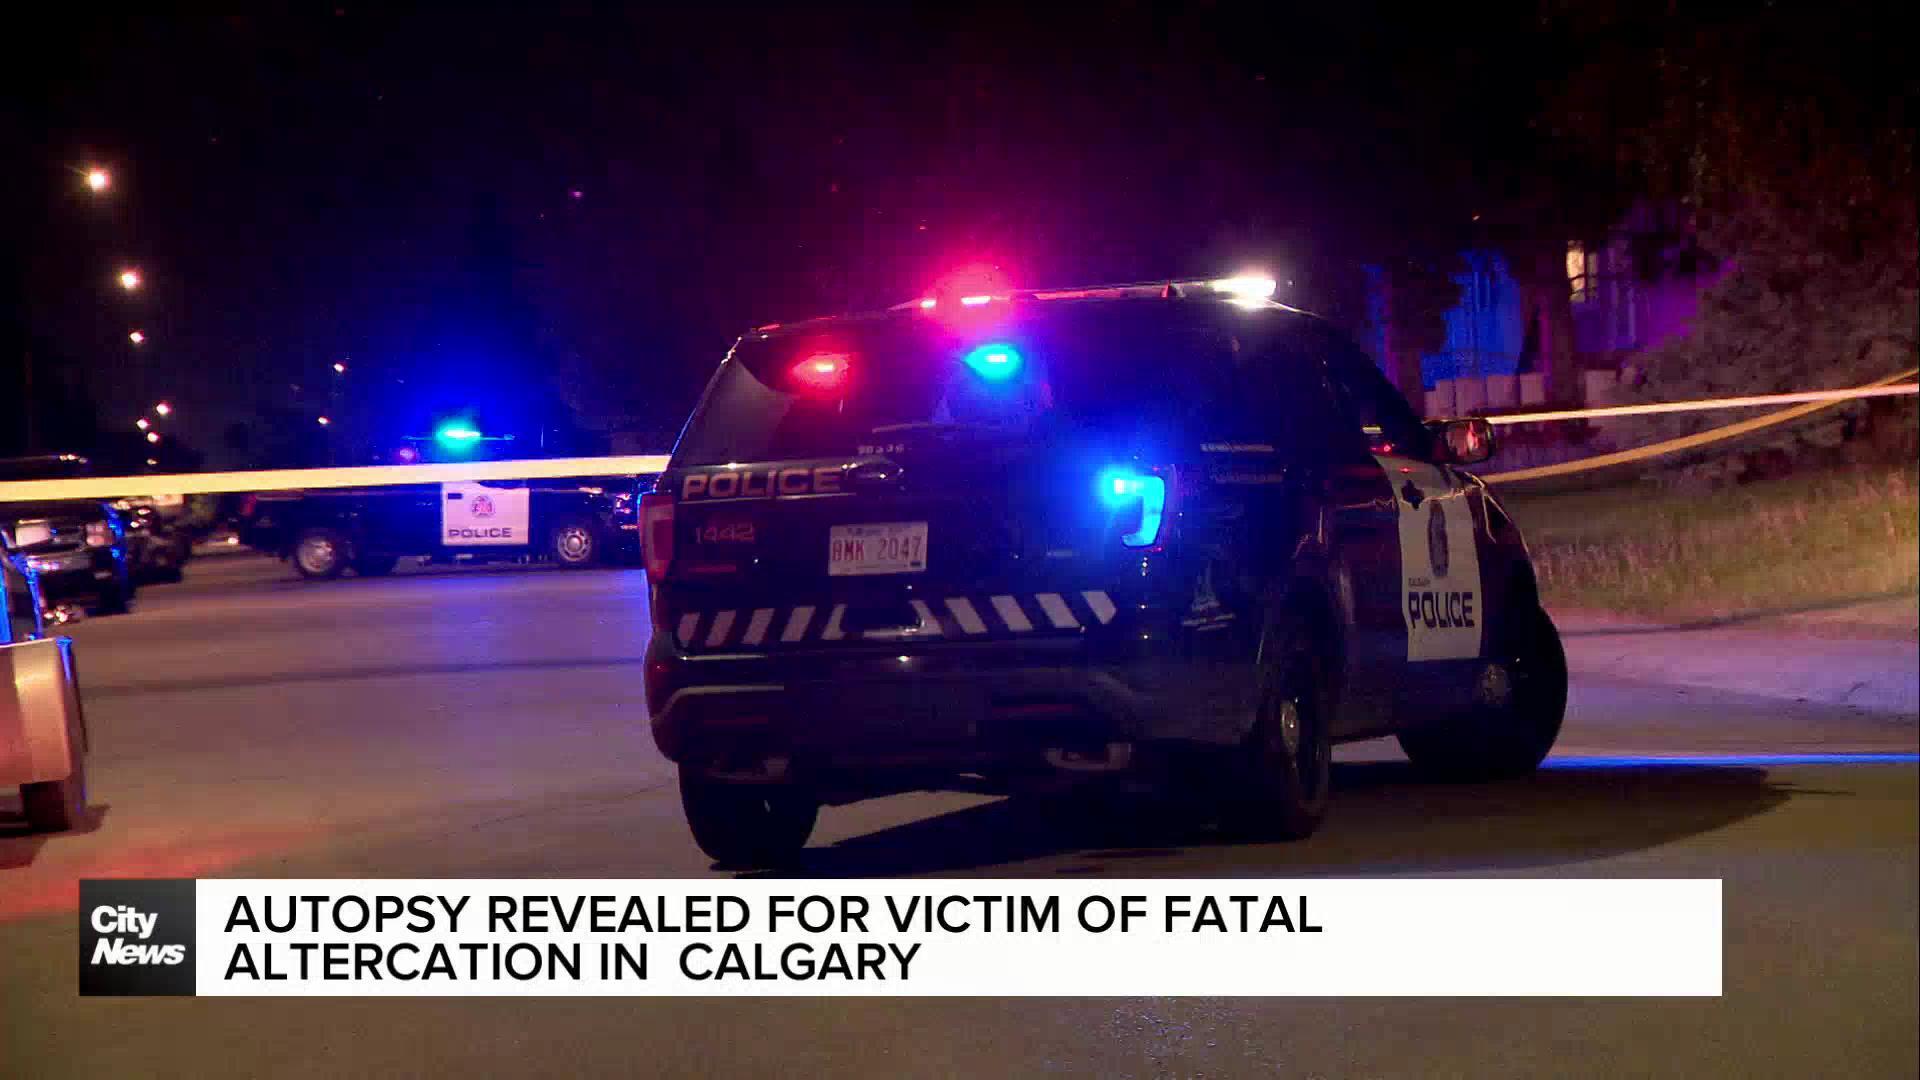 Autopsy revealed fatal altercation in Calgary is homicide